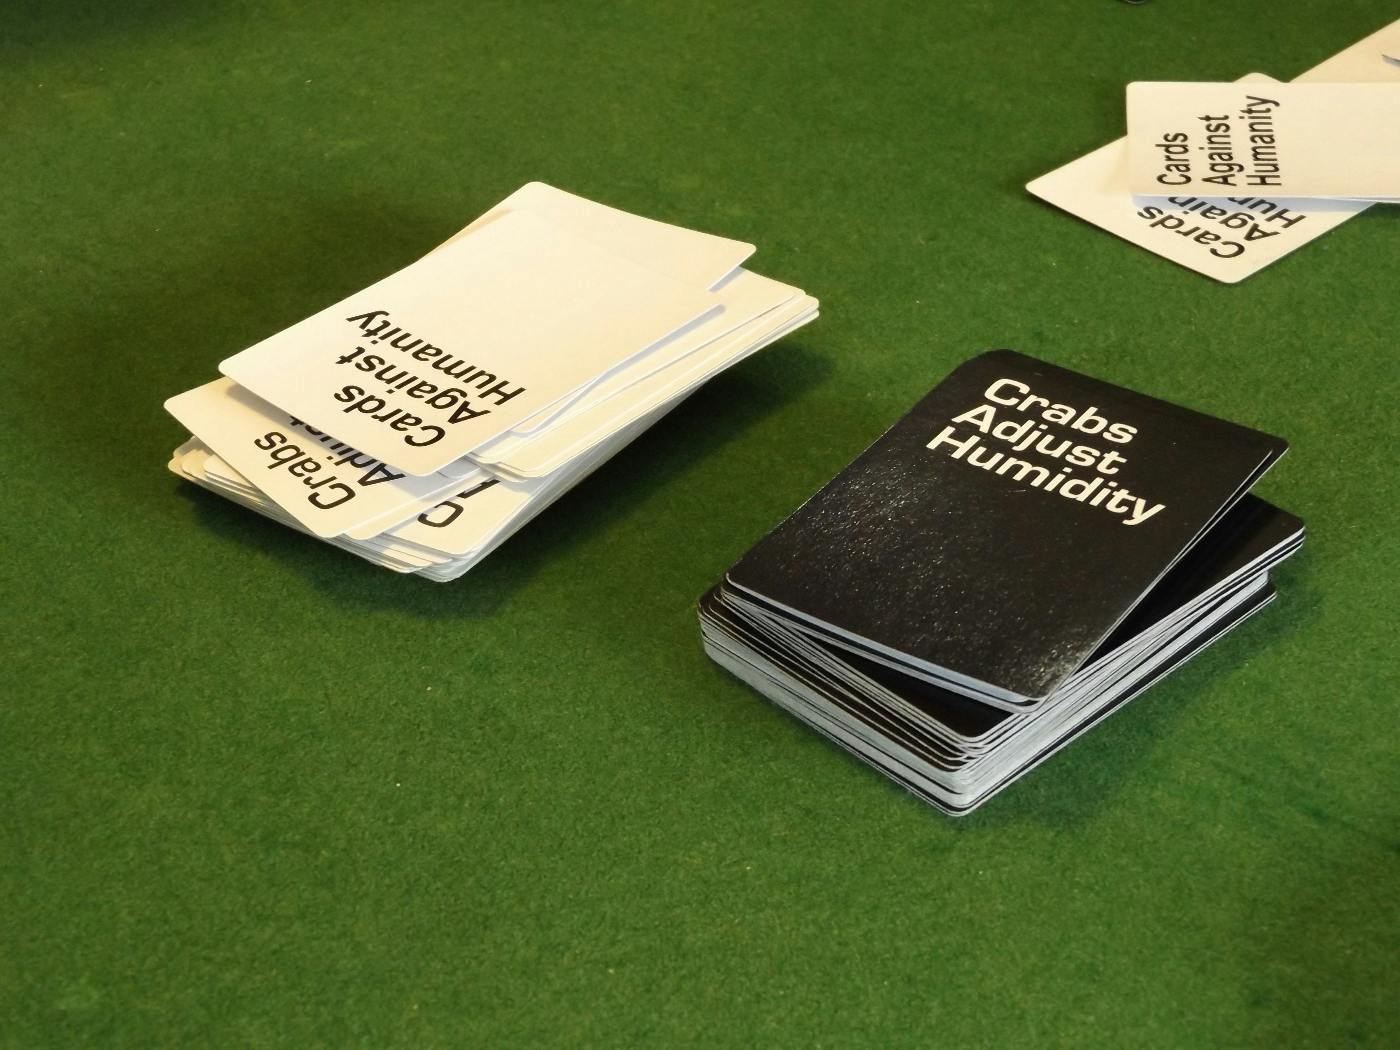 Green table top with Cards Against Humanity cards in blakc and white